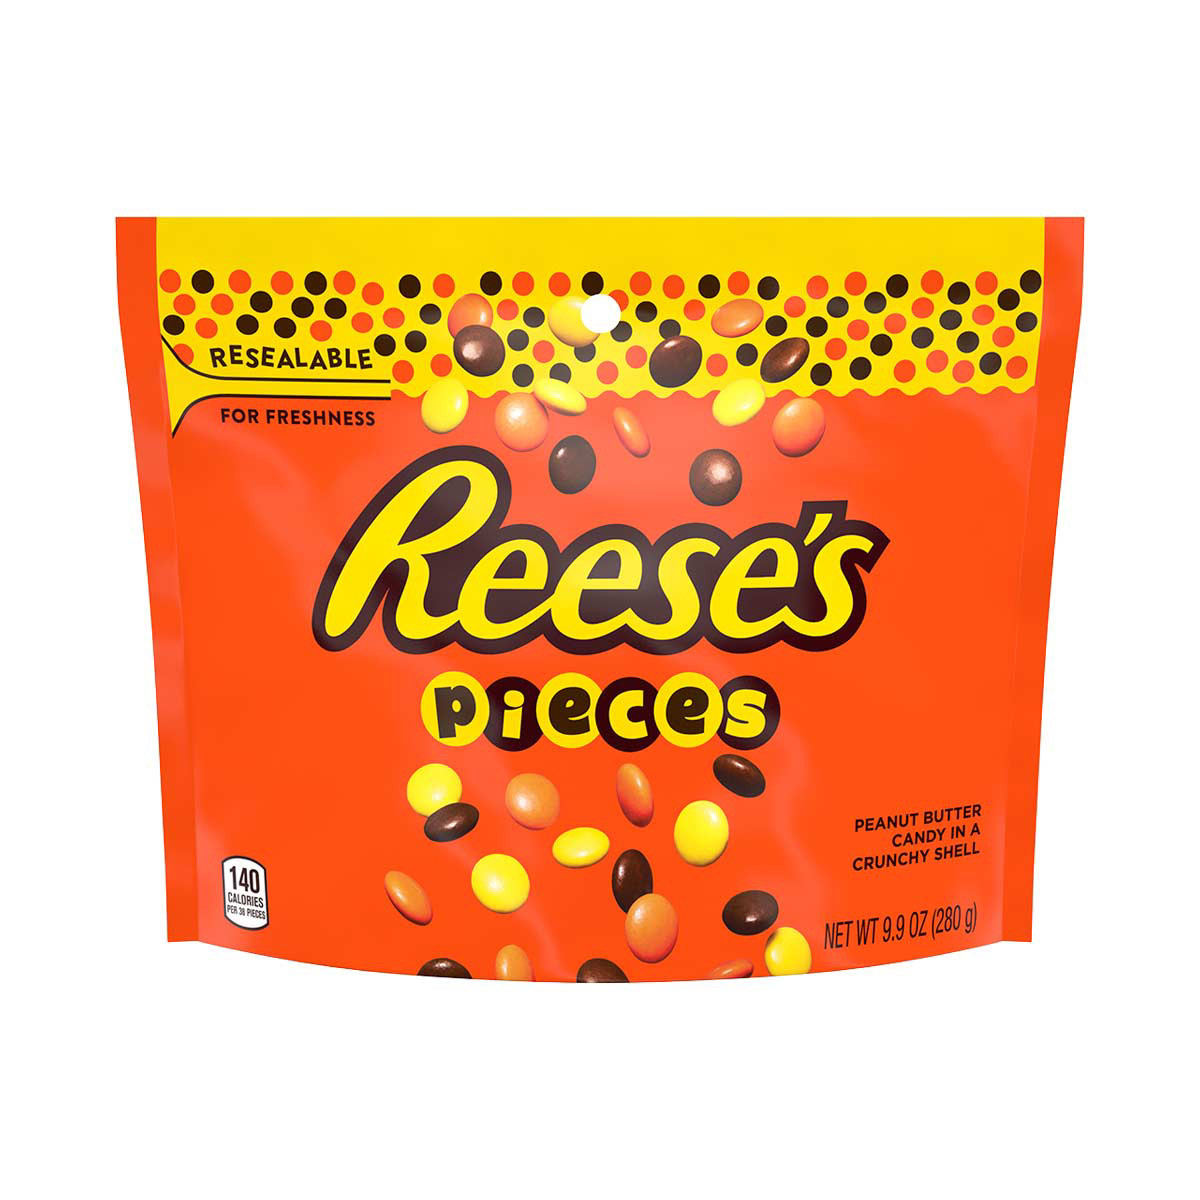 Reese's Pieces Peanut Butter Candy Pouch, 9.9 oz.